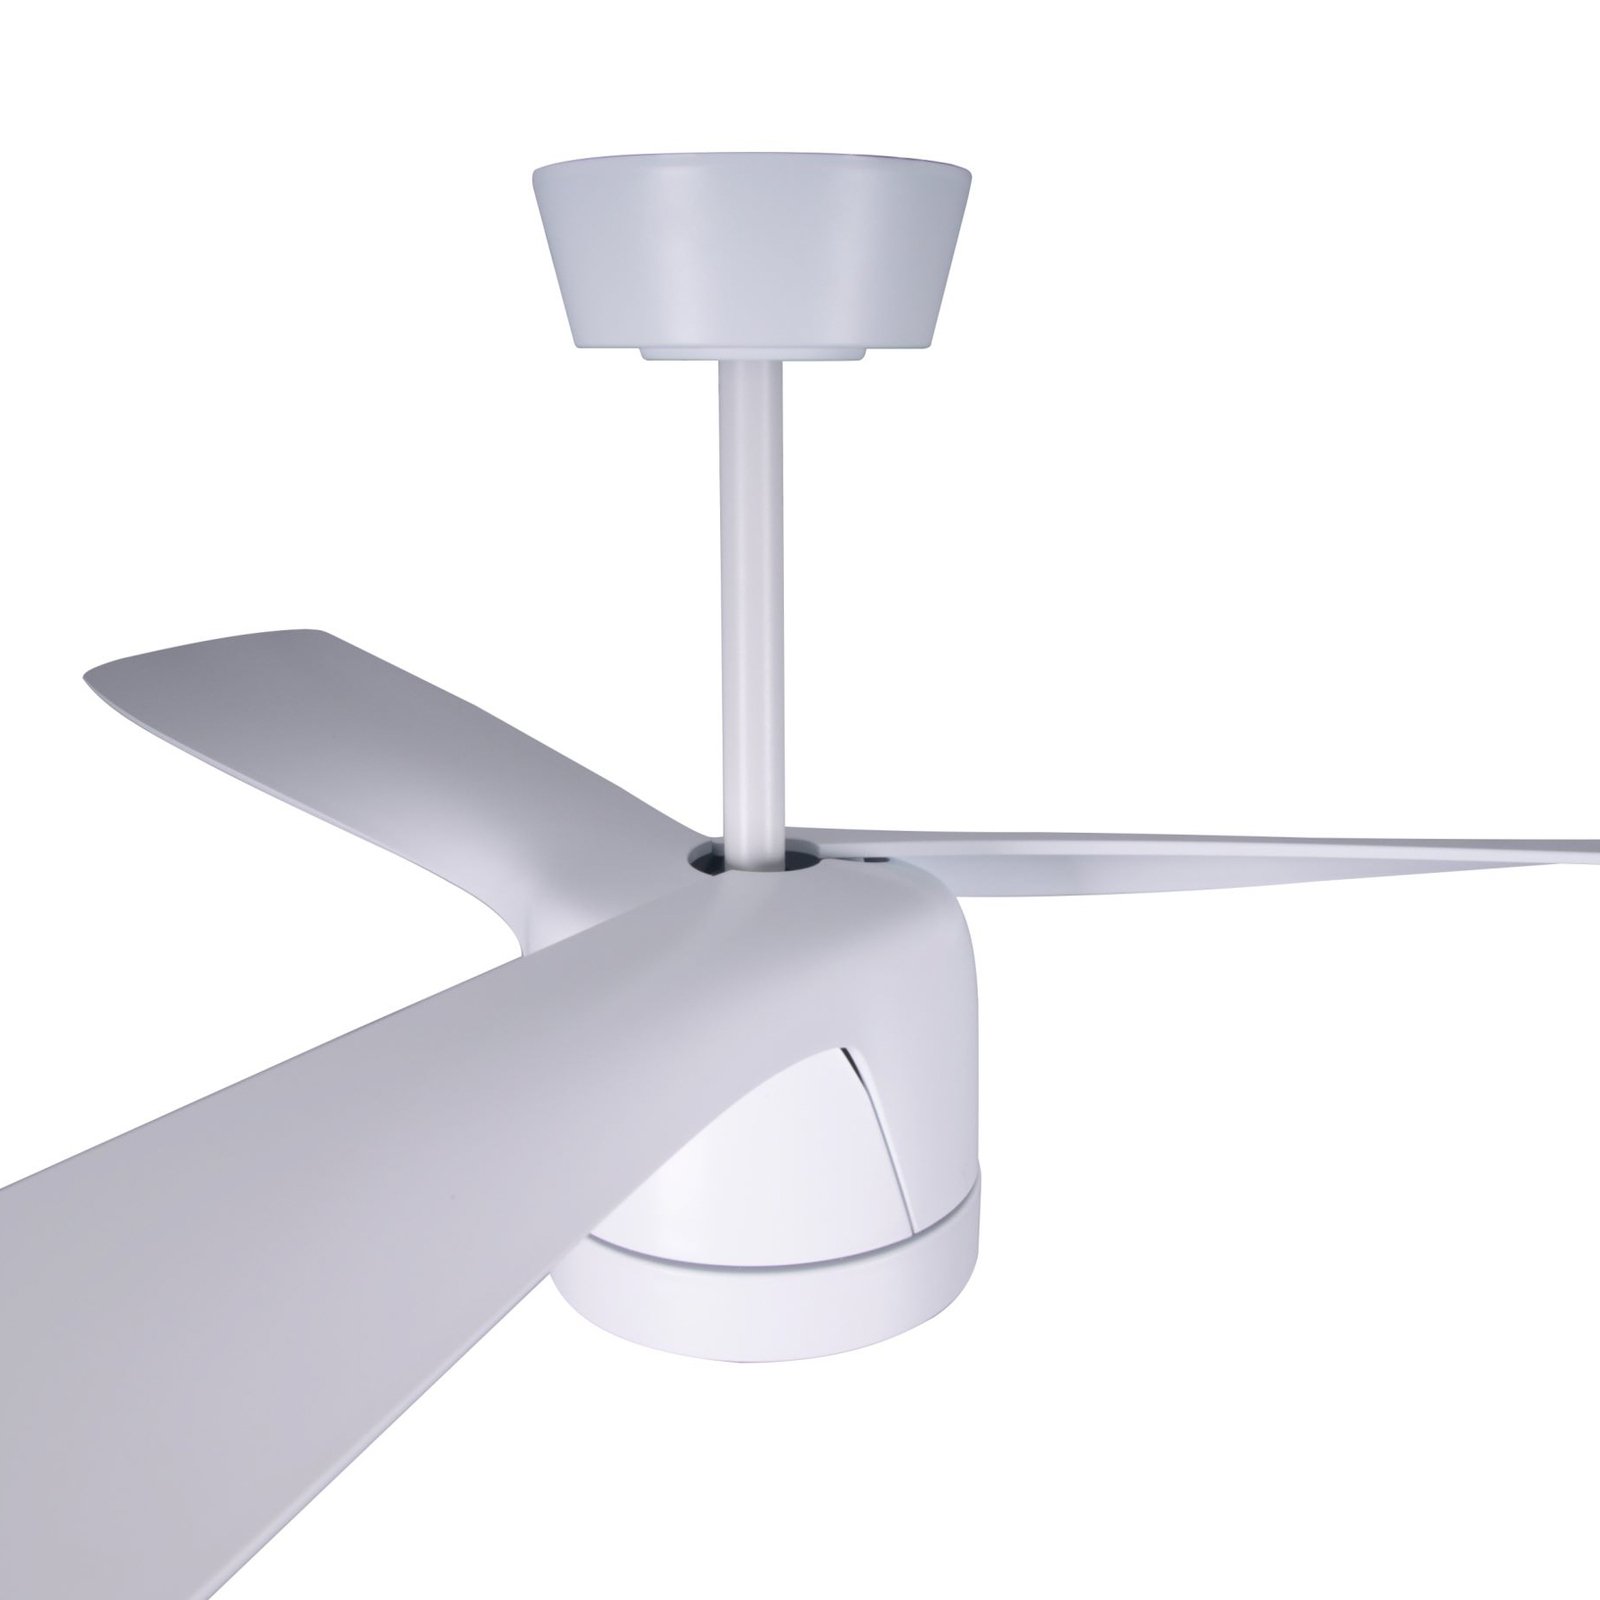 Beacon ceiling fan with light Peregrine white 142cm quiet